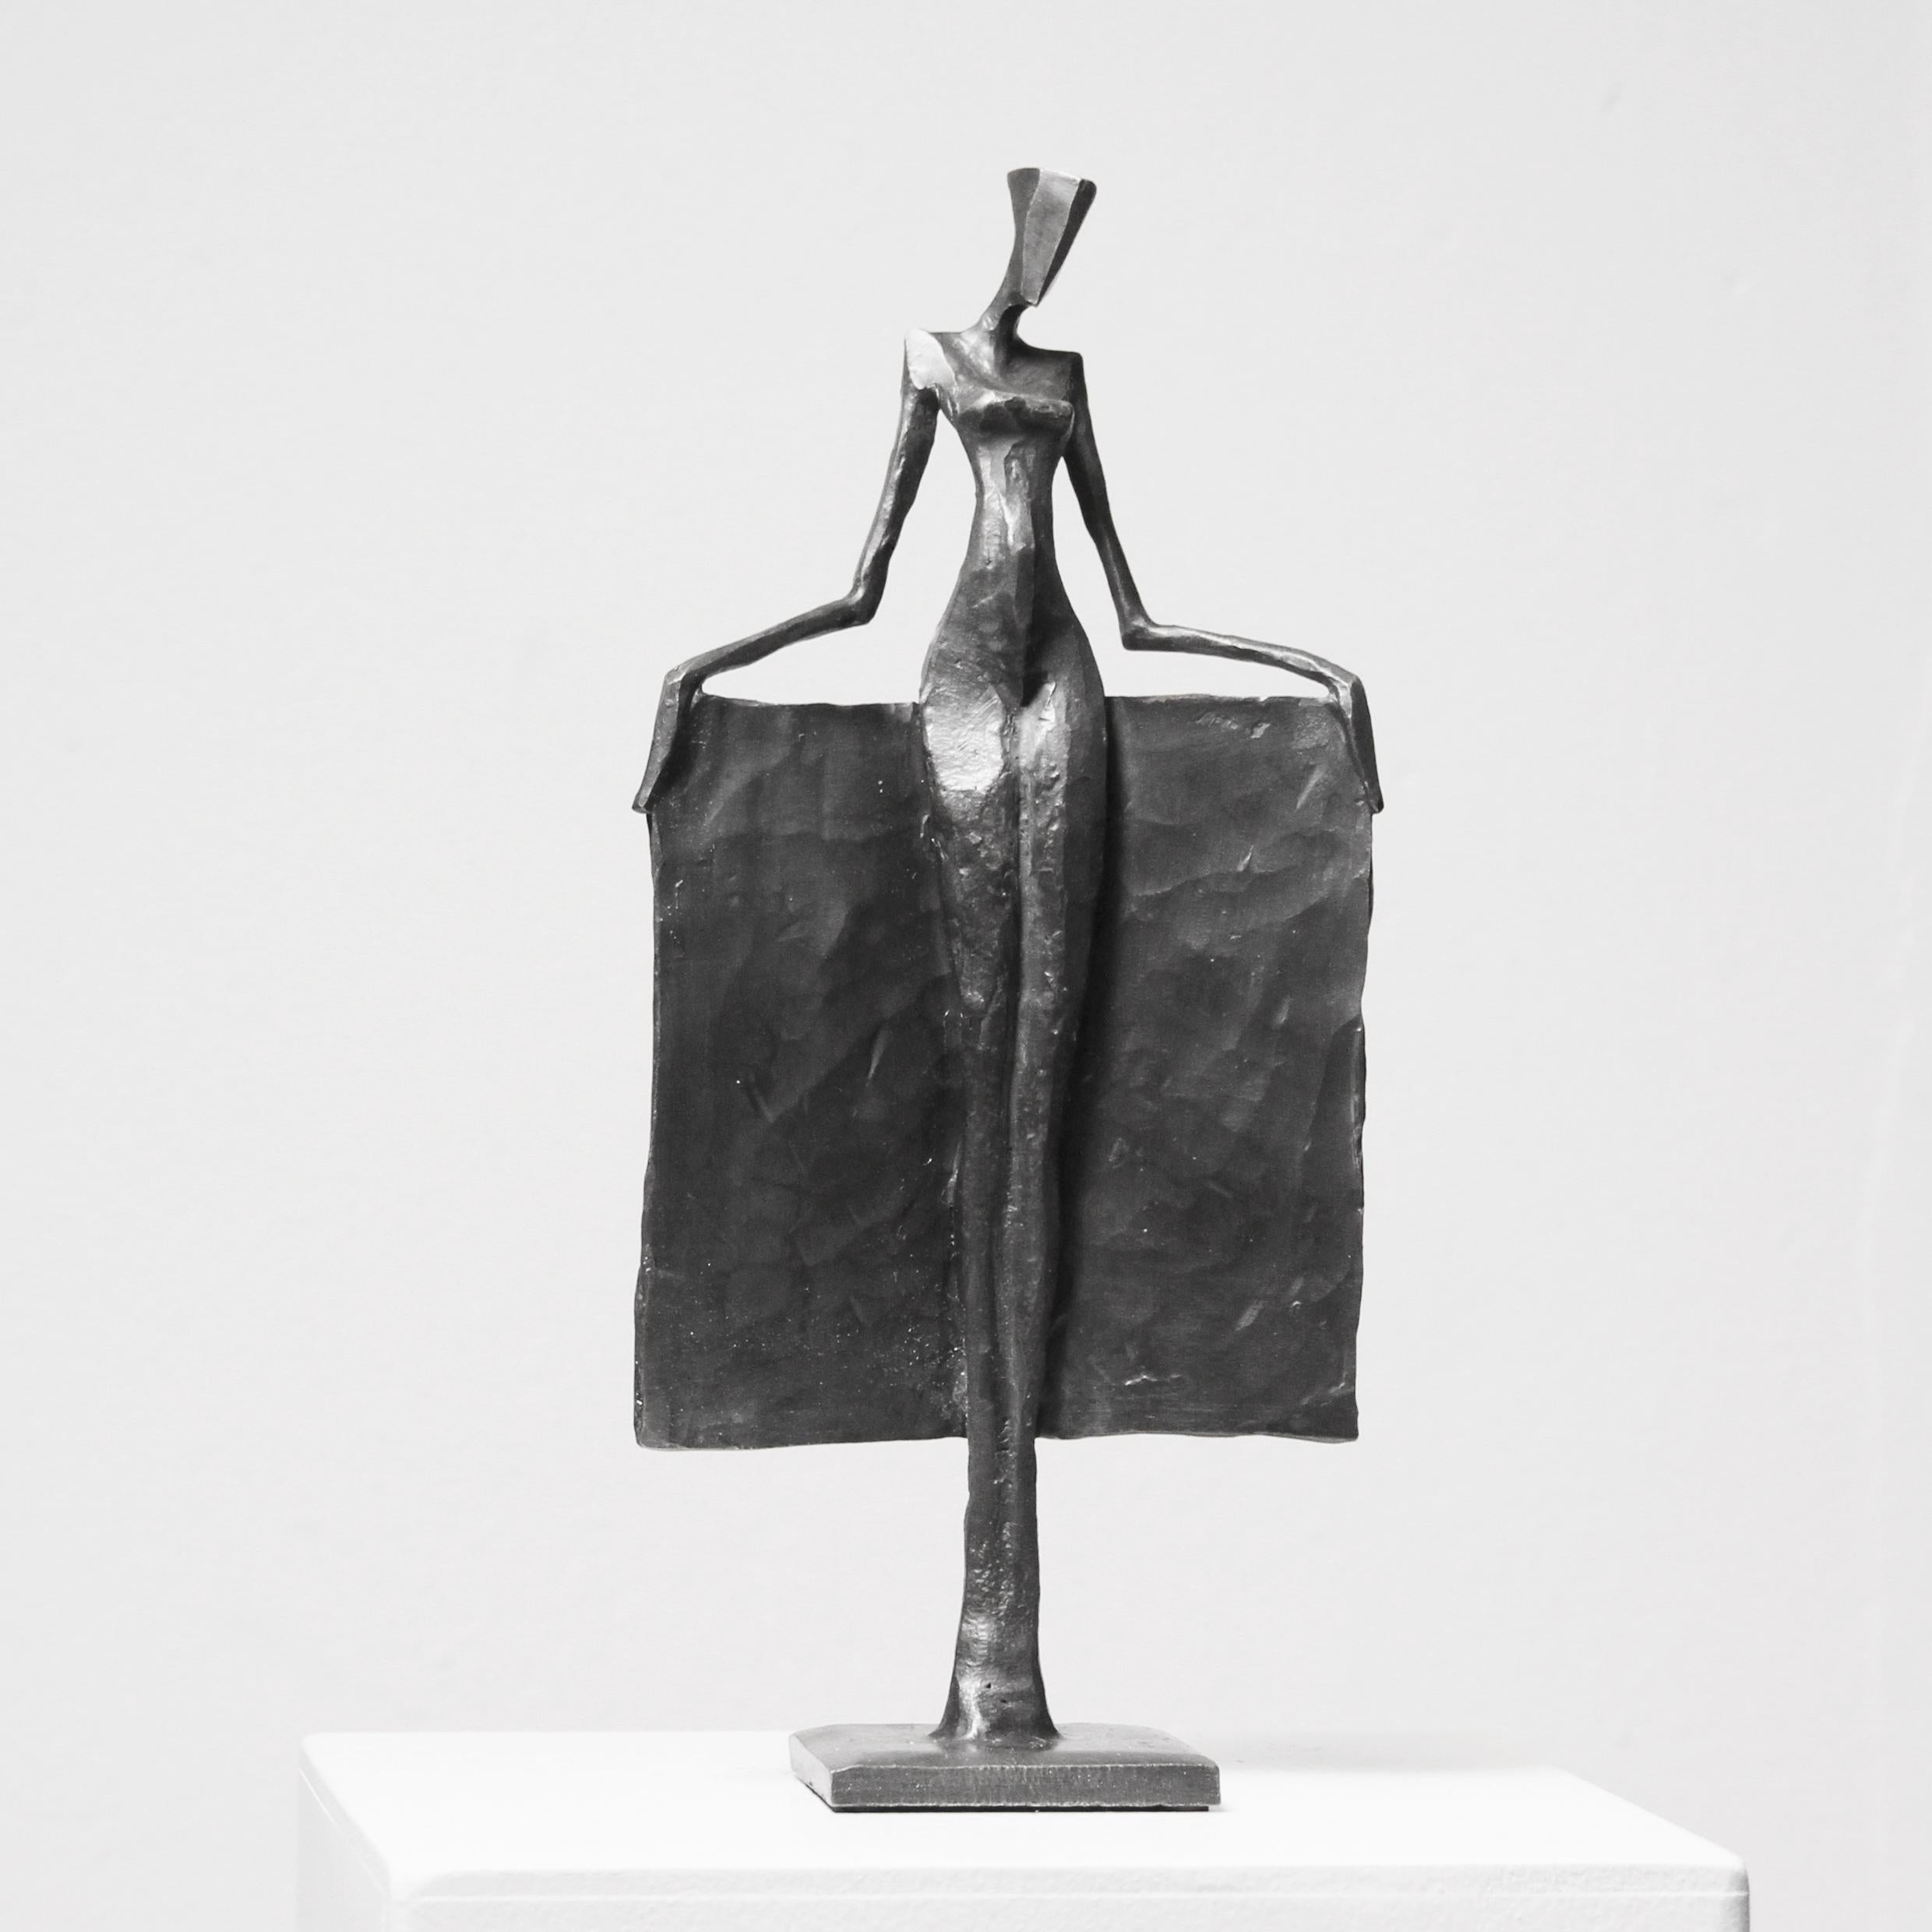 Neile is an elegant figurative bronze sculpture by Nando Kallweit.

Modelled on modern youthful postures but with a nod to the importance of heritage through the stylised Egyptian-influenced head. A lovely piece on its own or with a group of